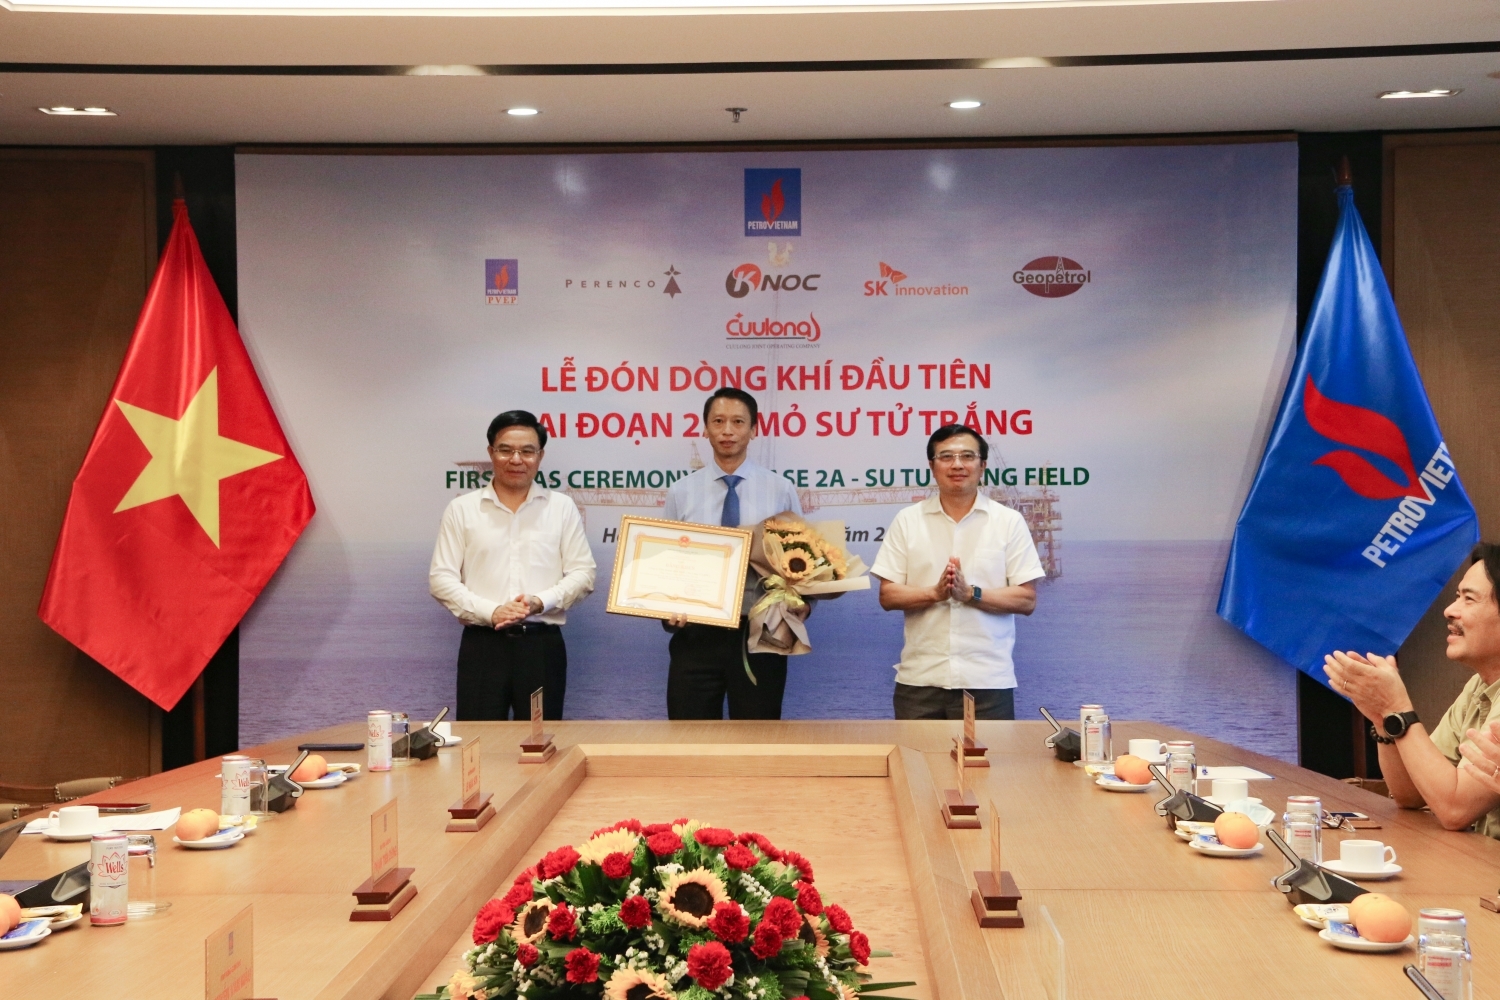 PetroVietnam receives first gas flow from White Lion oil field in stage 2A